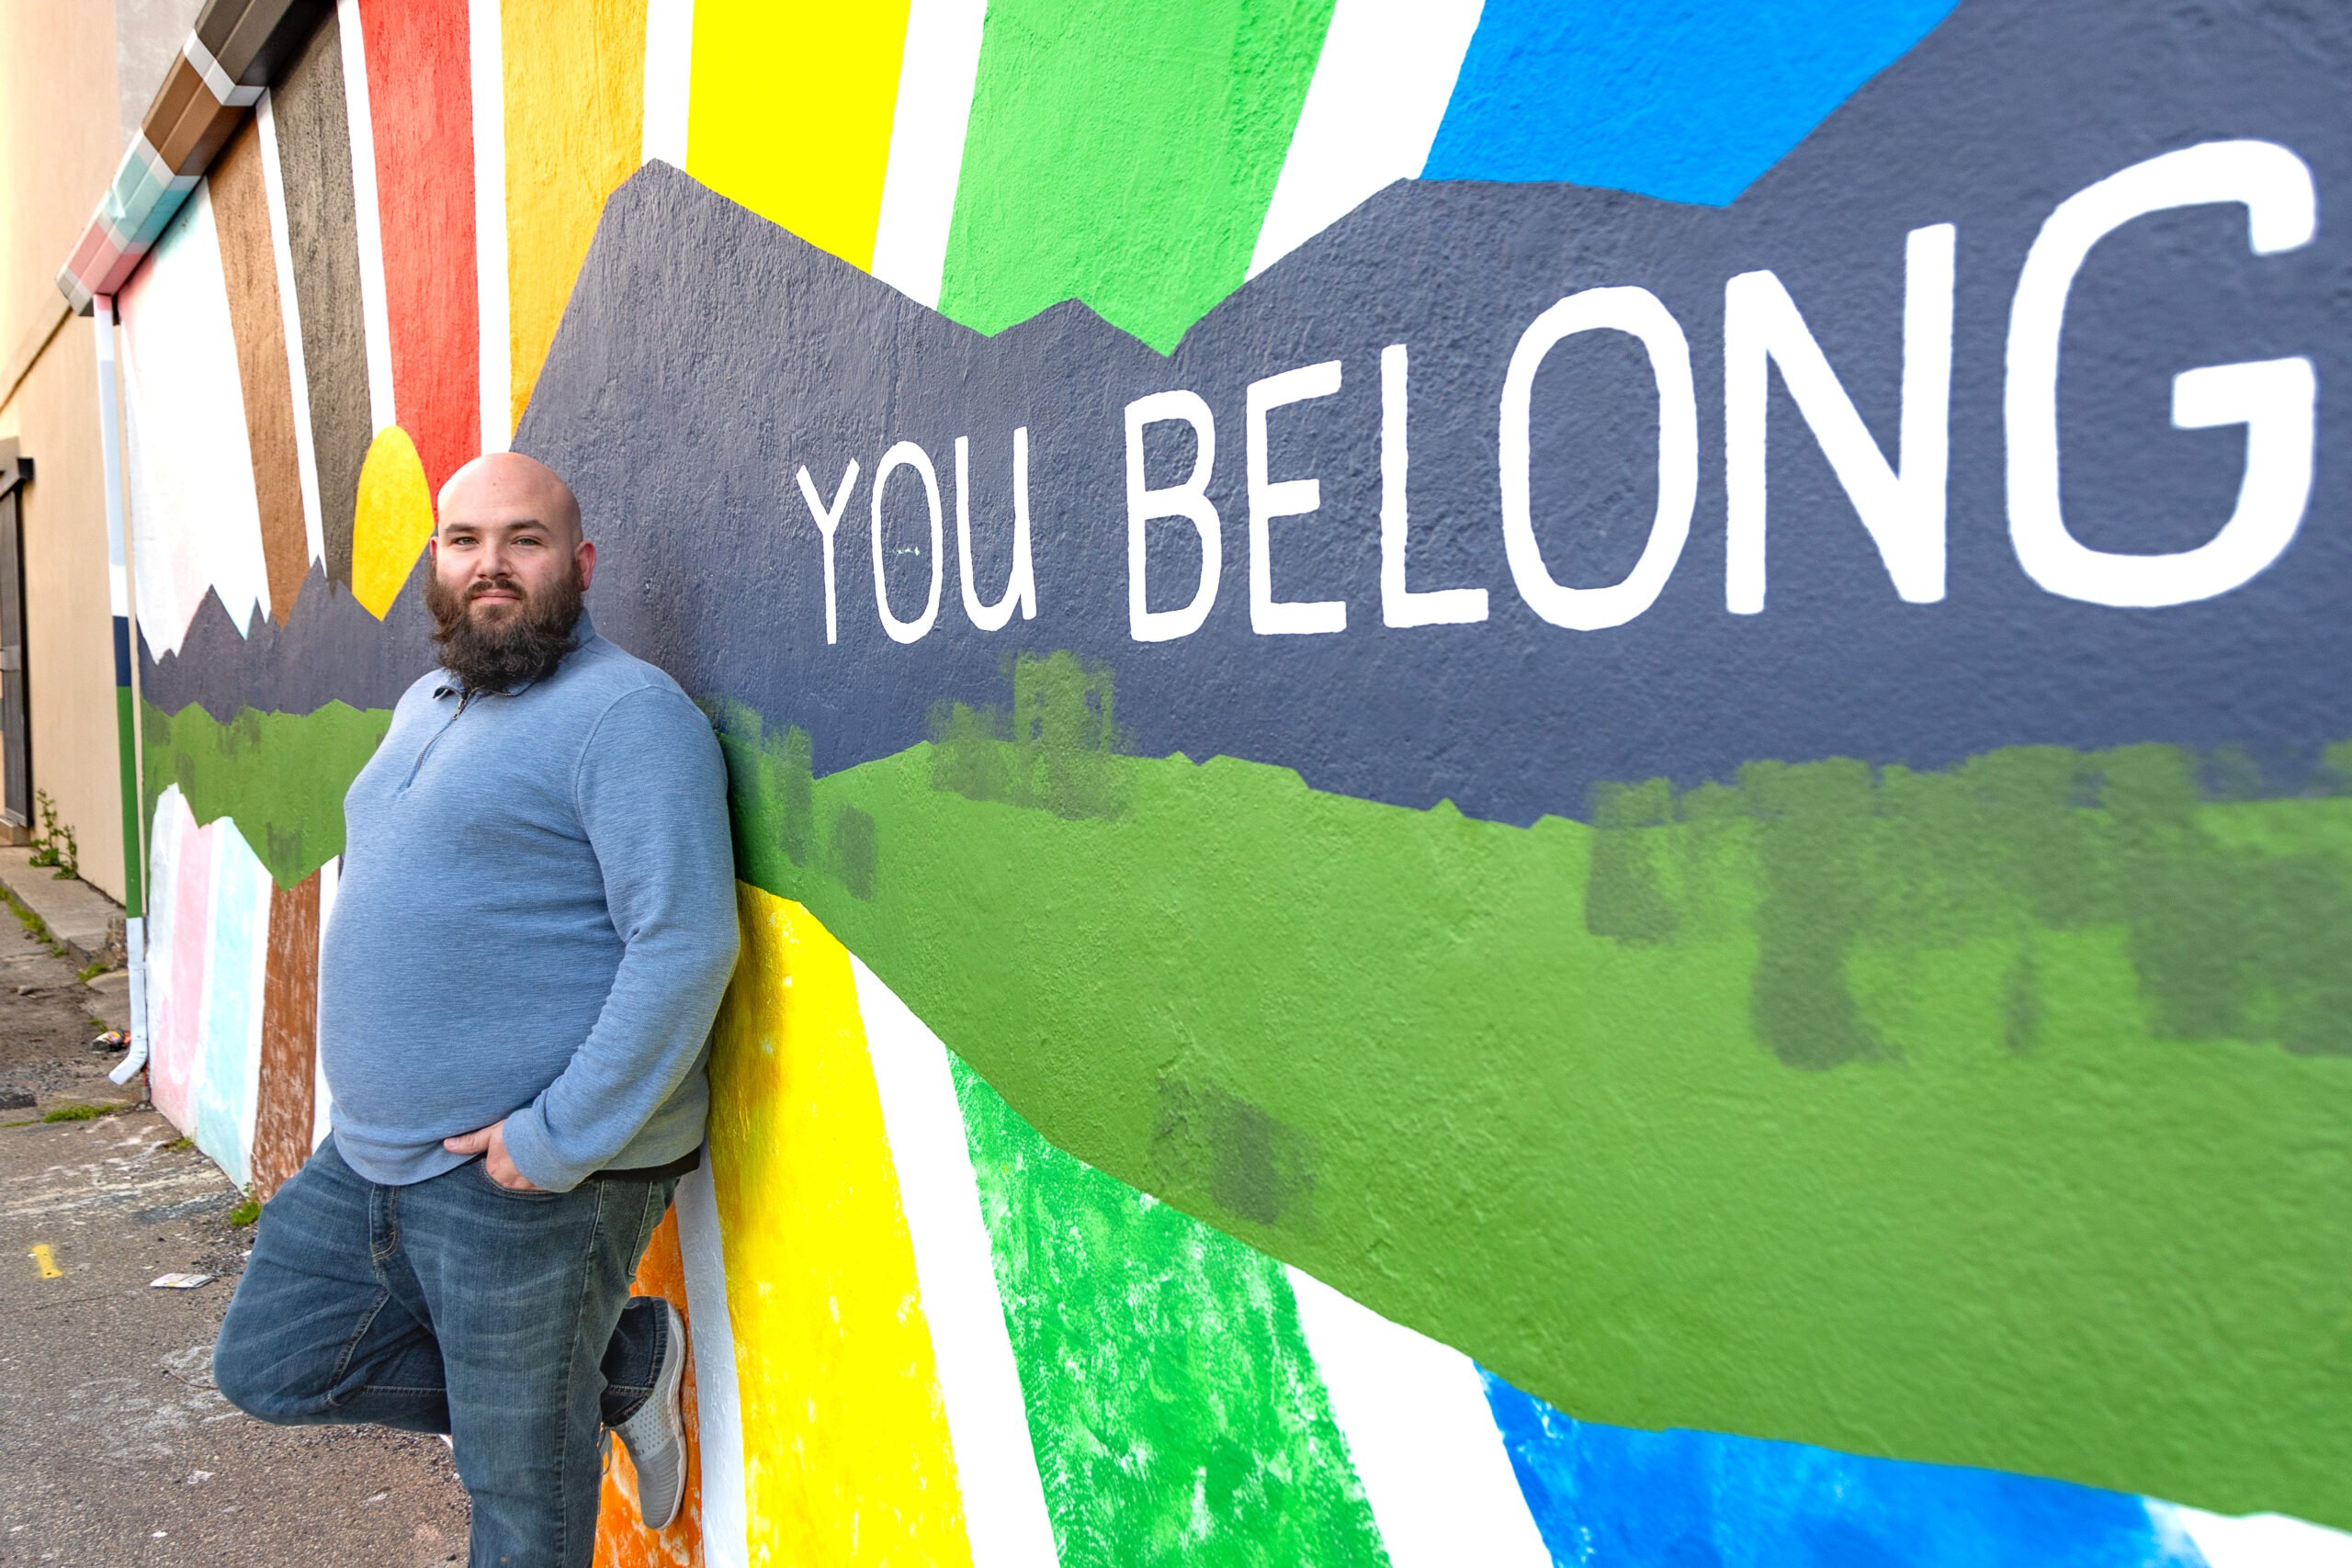 Keith Jackson standing in front of the iconic You Belong mural in downtown Redding.